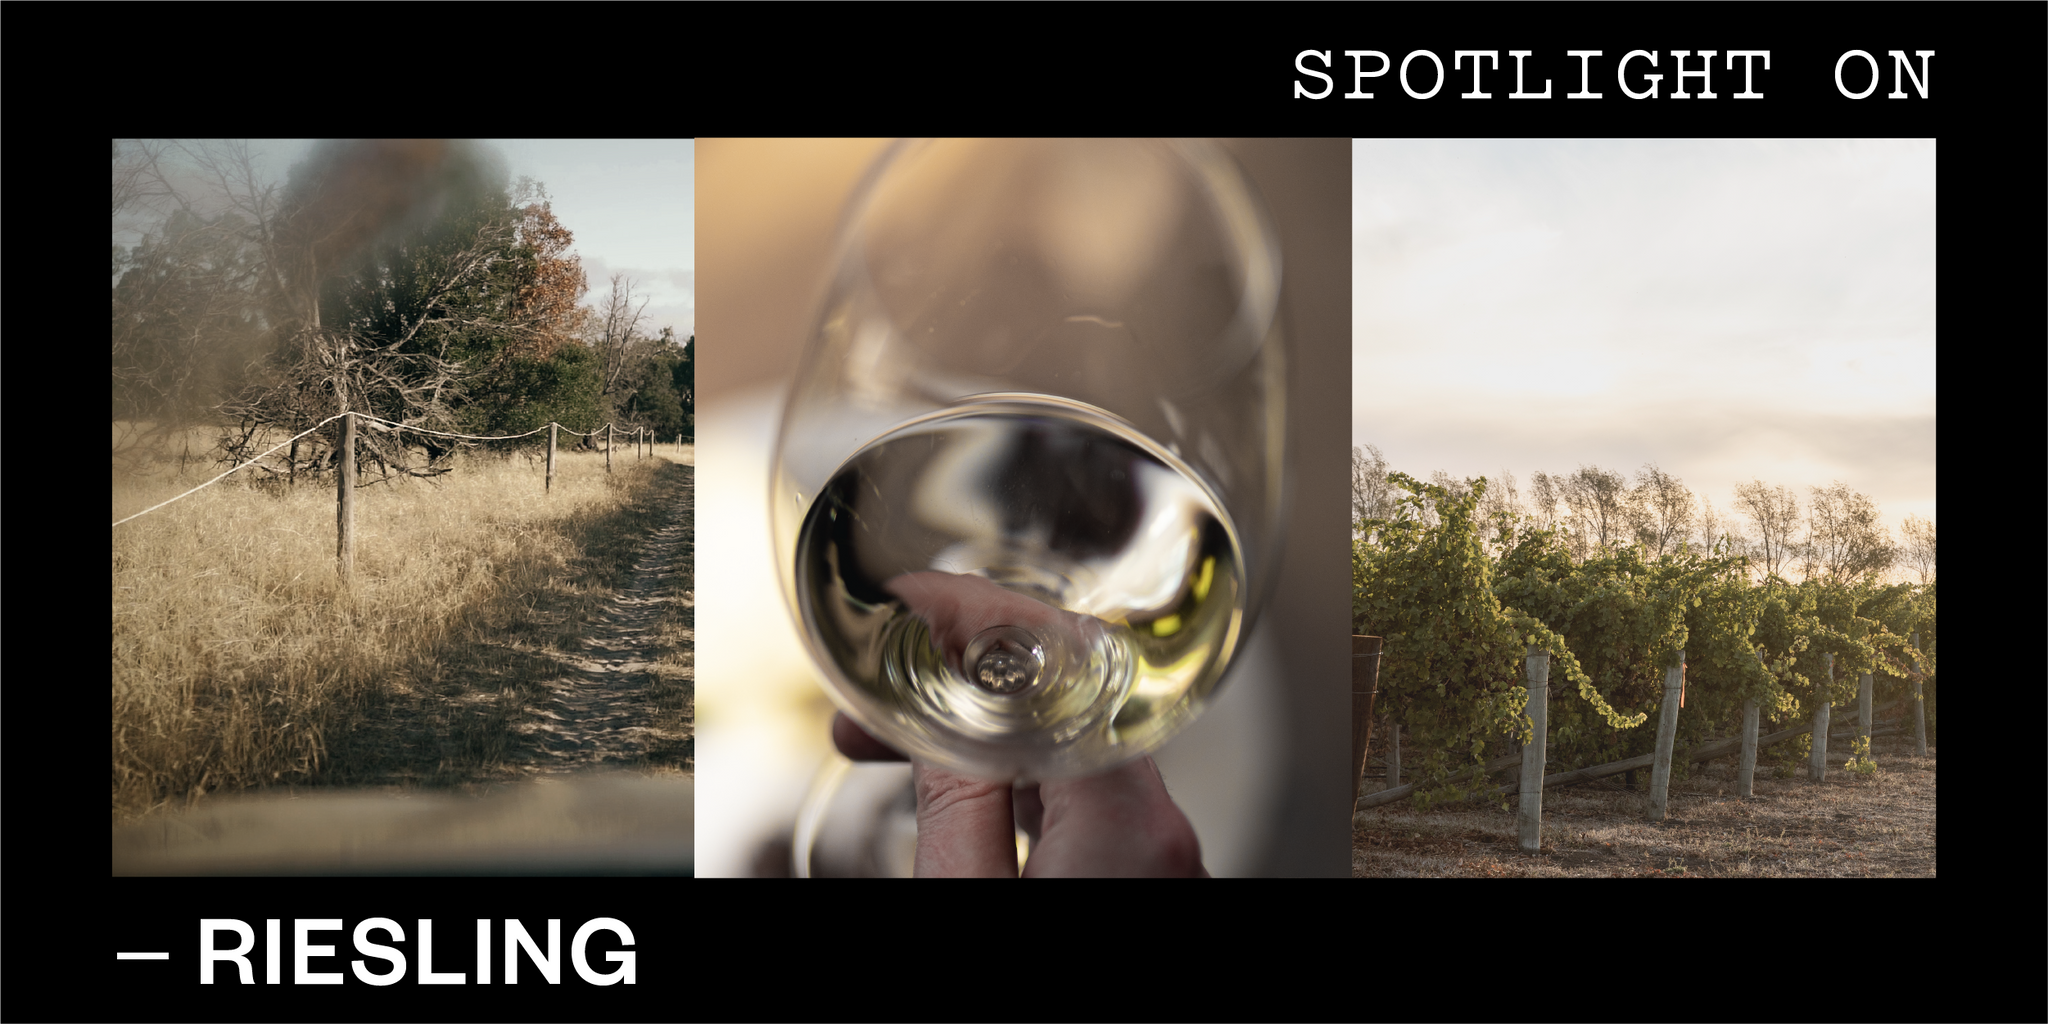 3 images of a vineyard, a glass of white wine, and another vineyard at sunset with the words Spotlight on Riesling.